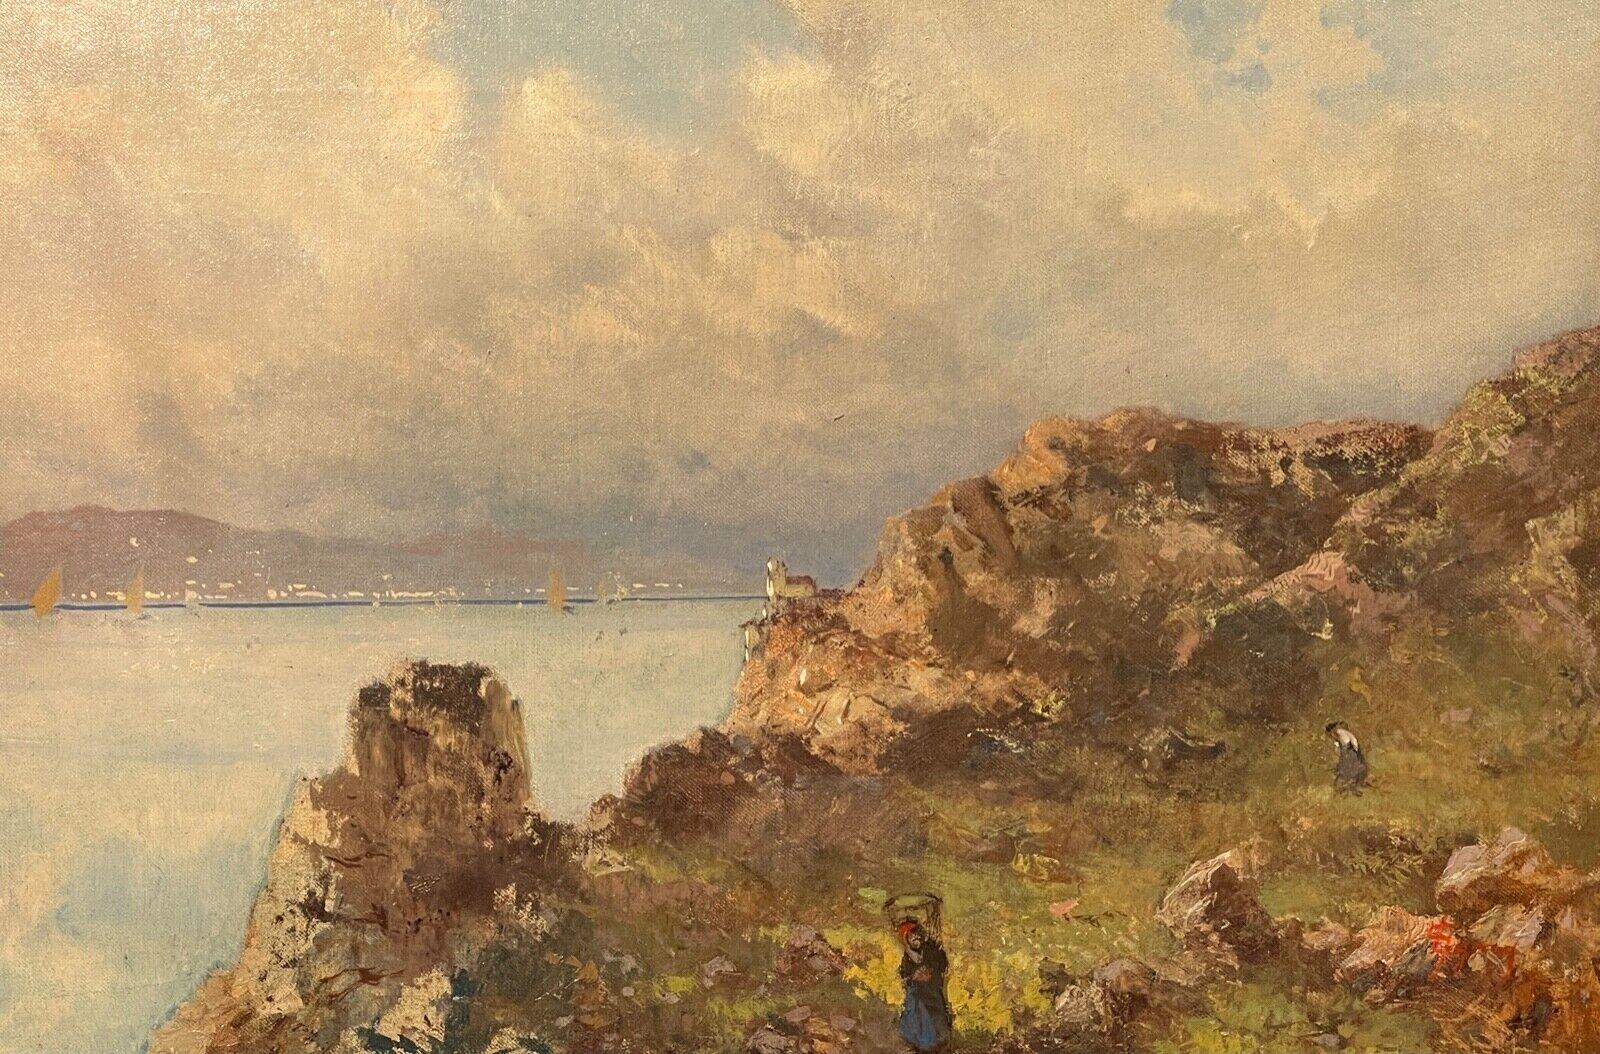 Ancient painting, oil on canvas, L. Gignous, View from the high coast, 19th century
Oil painting on canvas executed and signed by Lorenzo Gignous, depicting a marina seen from above on a rocky coast, boats in the background and figures inserted in